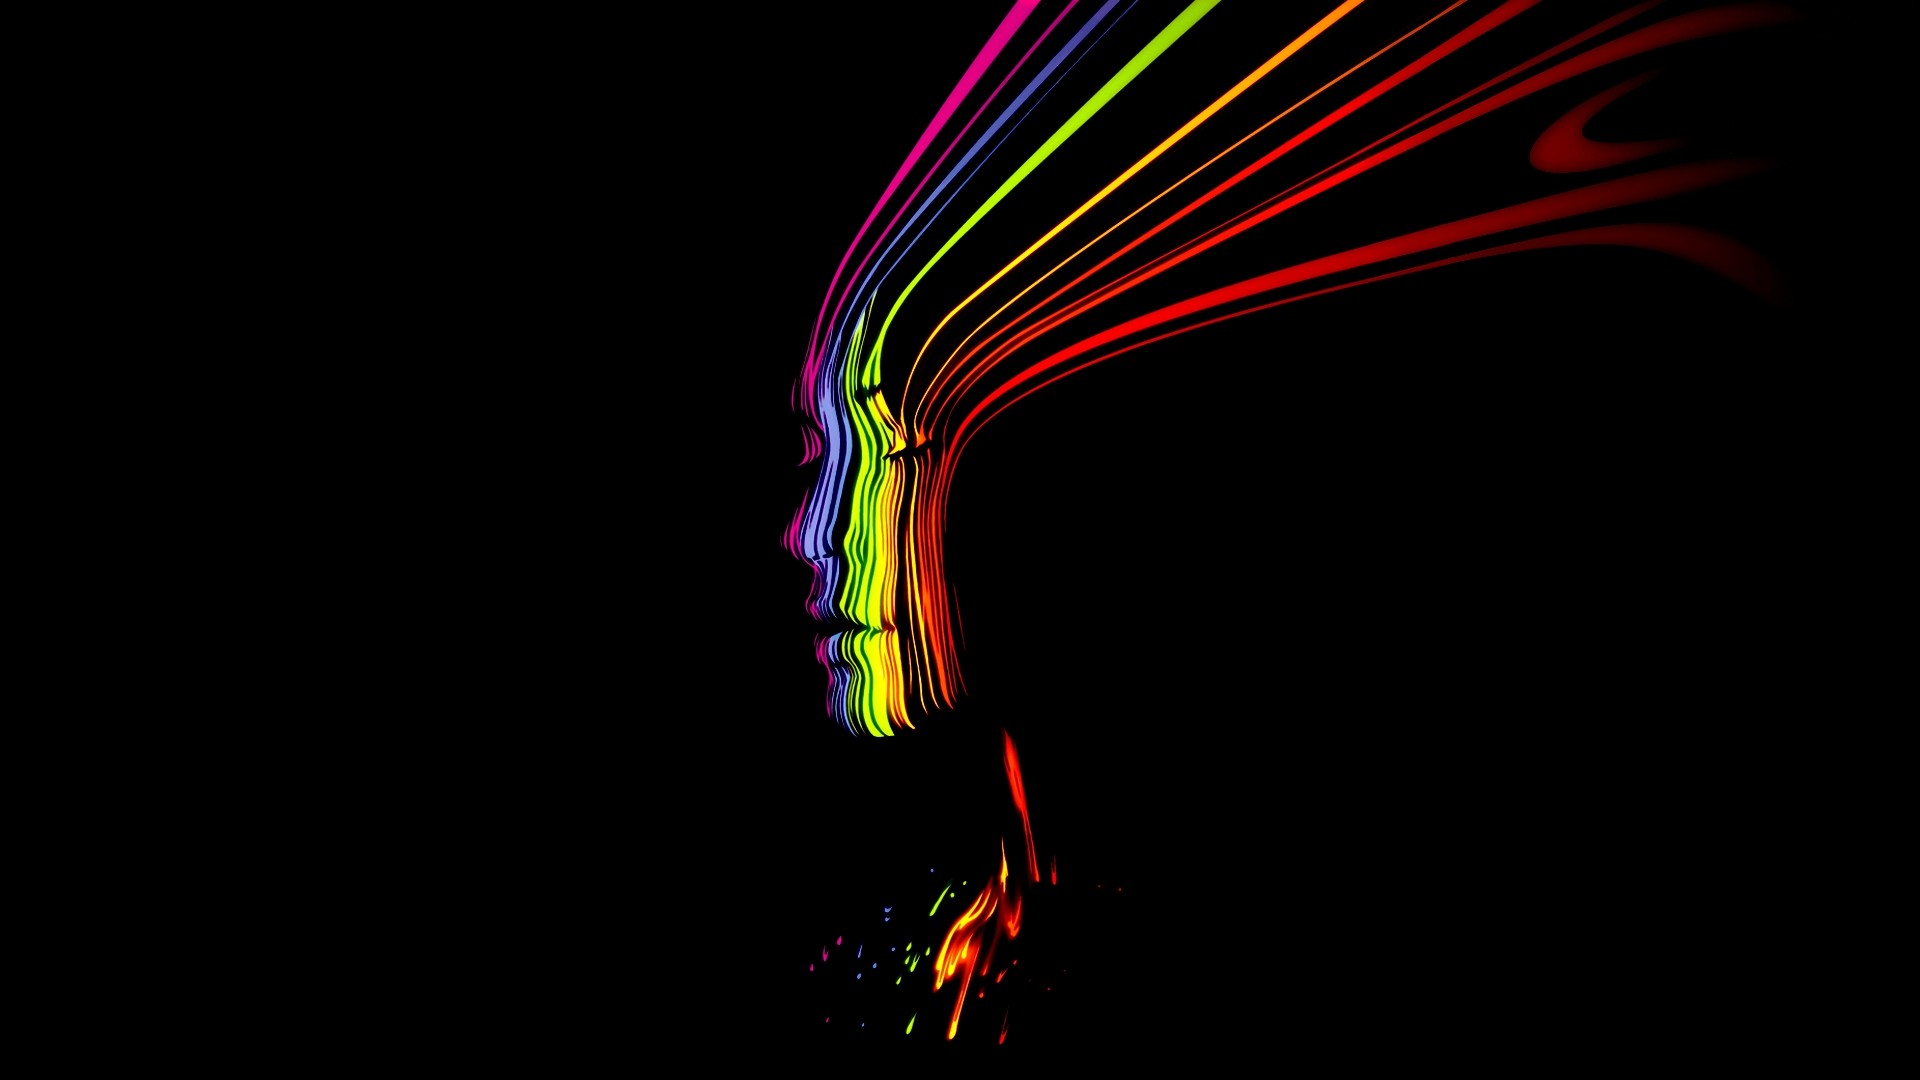 General 1920x1080 women face lines colorful closed eyes minimalism digital art simple background black background